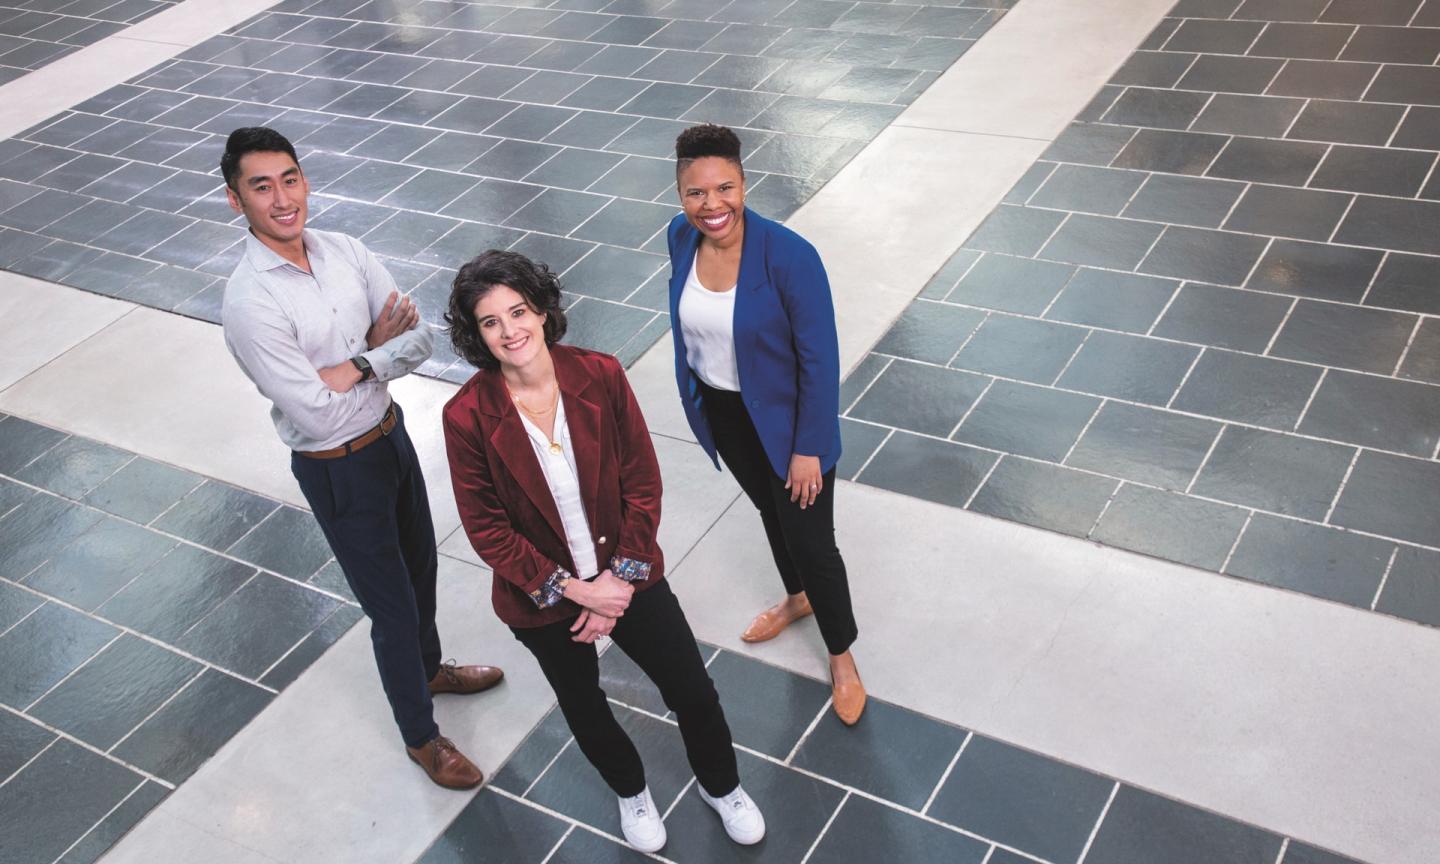 Professor Jamie Jones, center, with student founders Kandasi Griffiths, right, and Willis Wong in the Fox Center, just outside the new entrepreneurship co-working space due to open later this year.